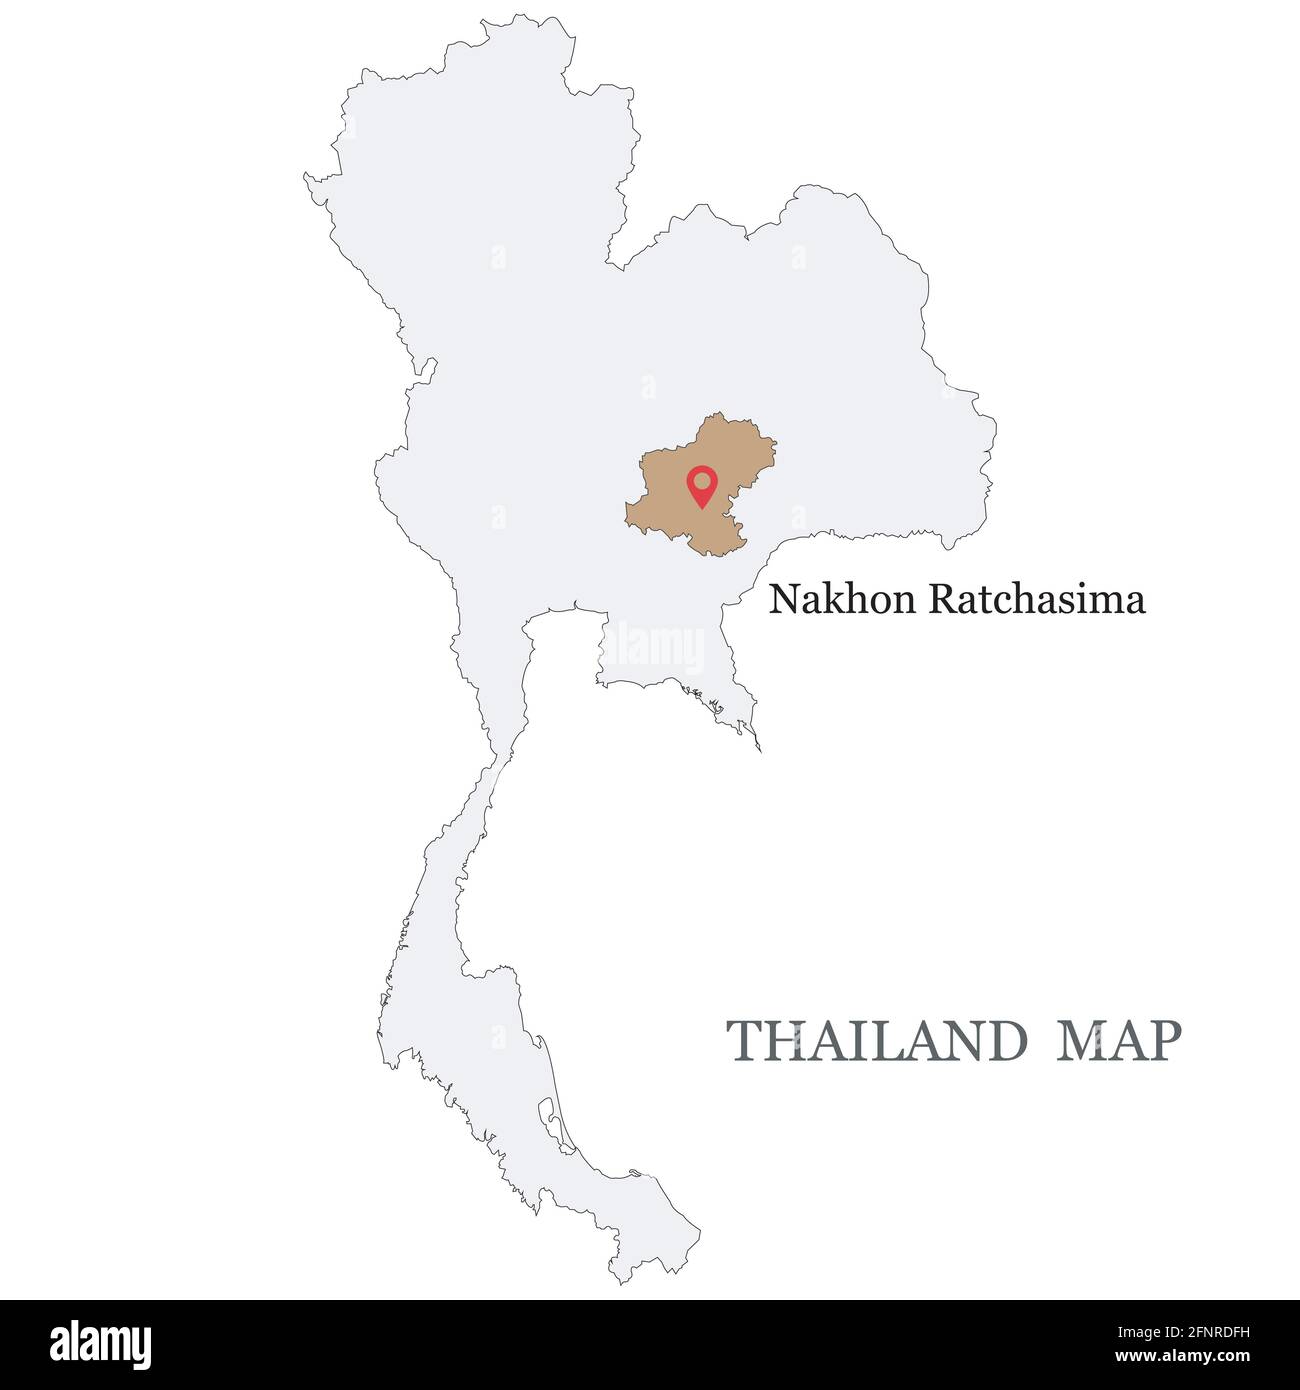 Maps Of Thailand With Red Maps Pin On Khorat Korat Or Nakhon Ratchasima Province In Golden Brown Area In White Background Stock Vector Image Art Alamy